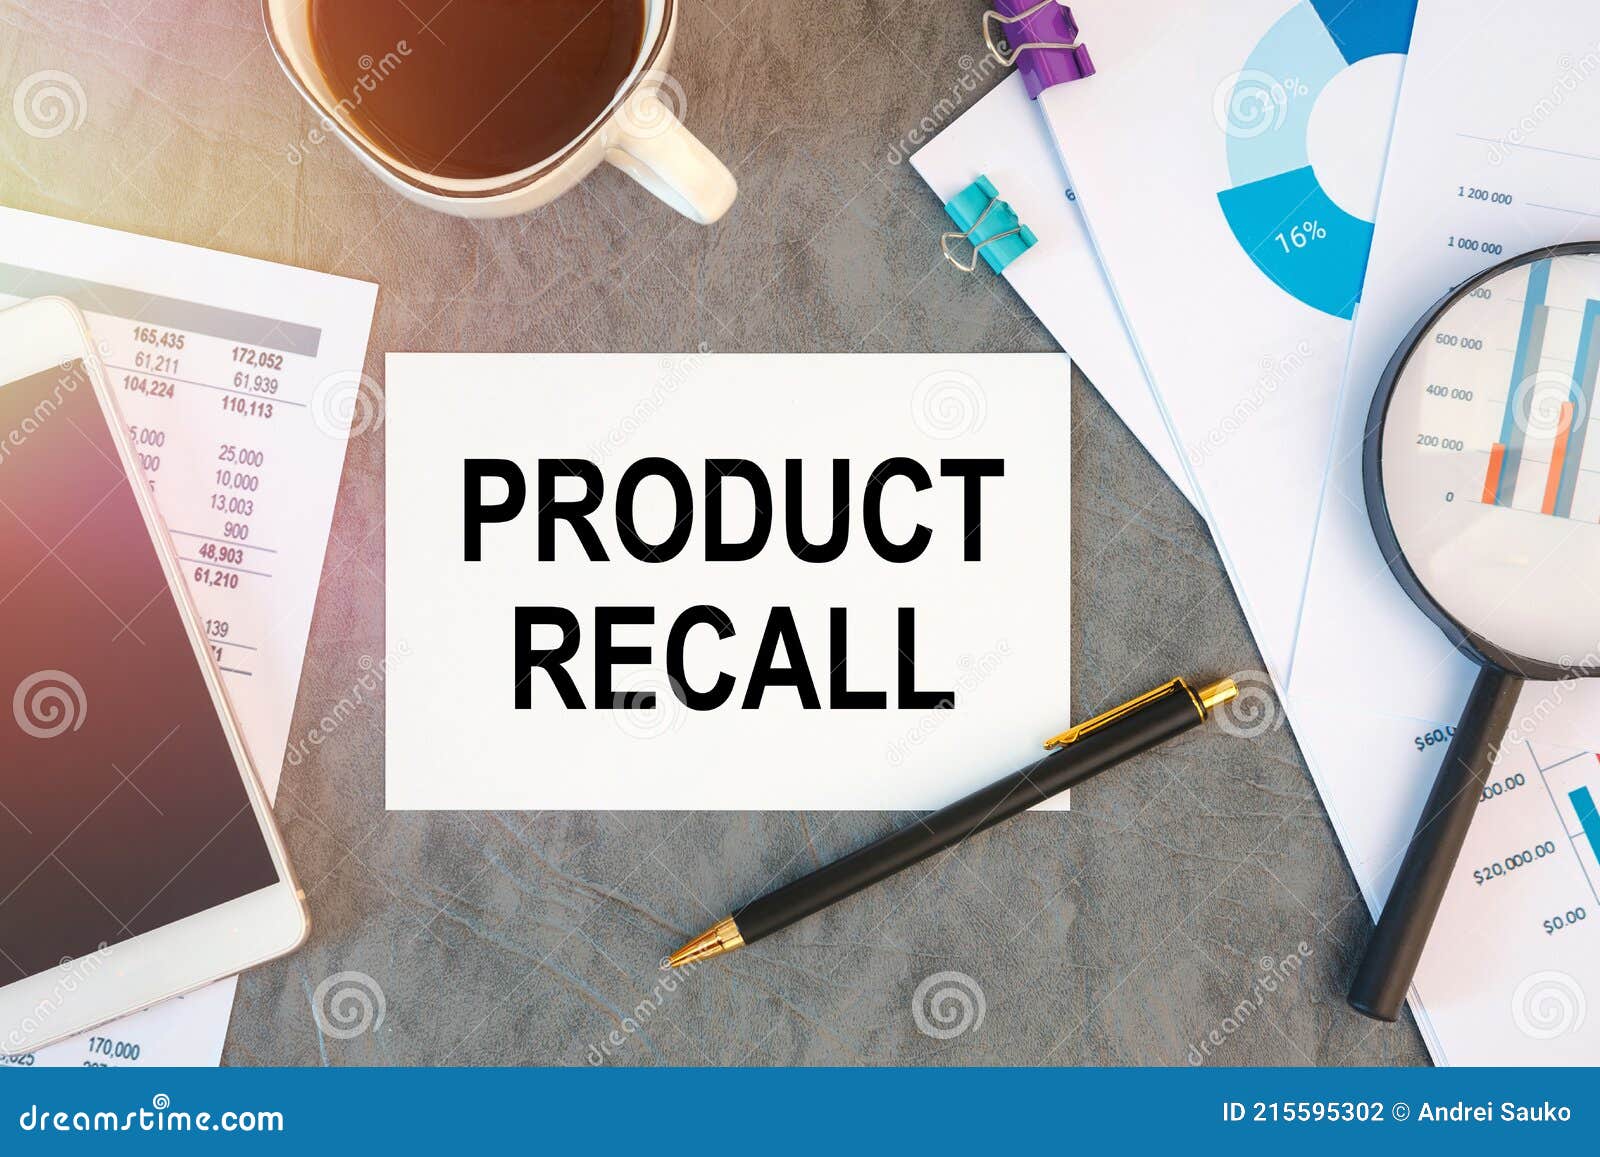 PRODUCT RECALL is Written in a Document on the Office Desk, Coffee, Diagram  and Smartfon Stock Photo - Image of return, endanger: 215595302